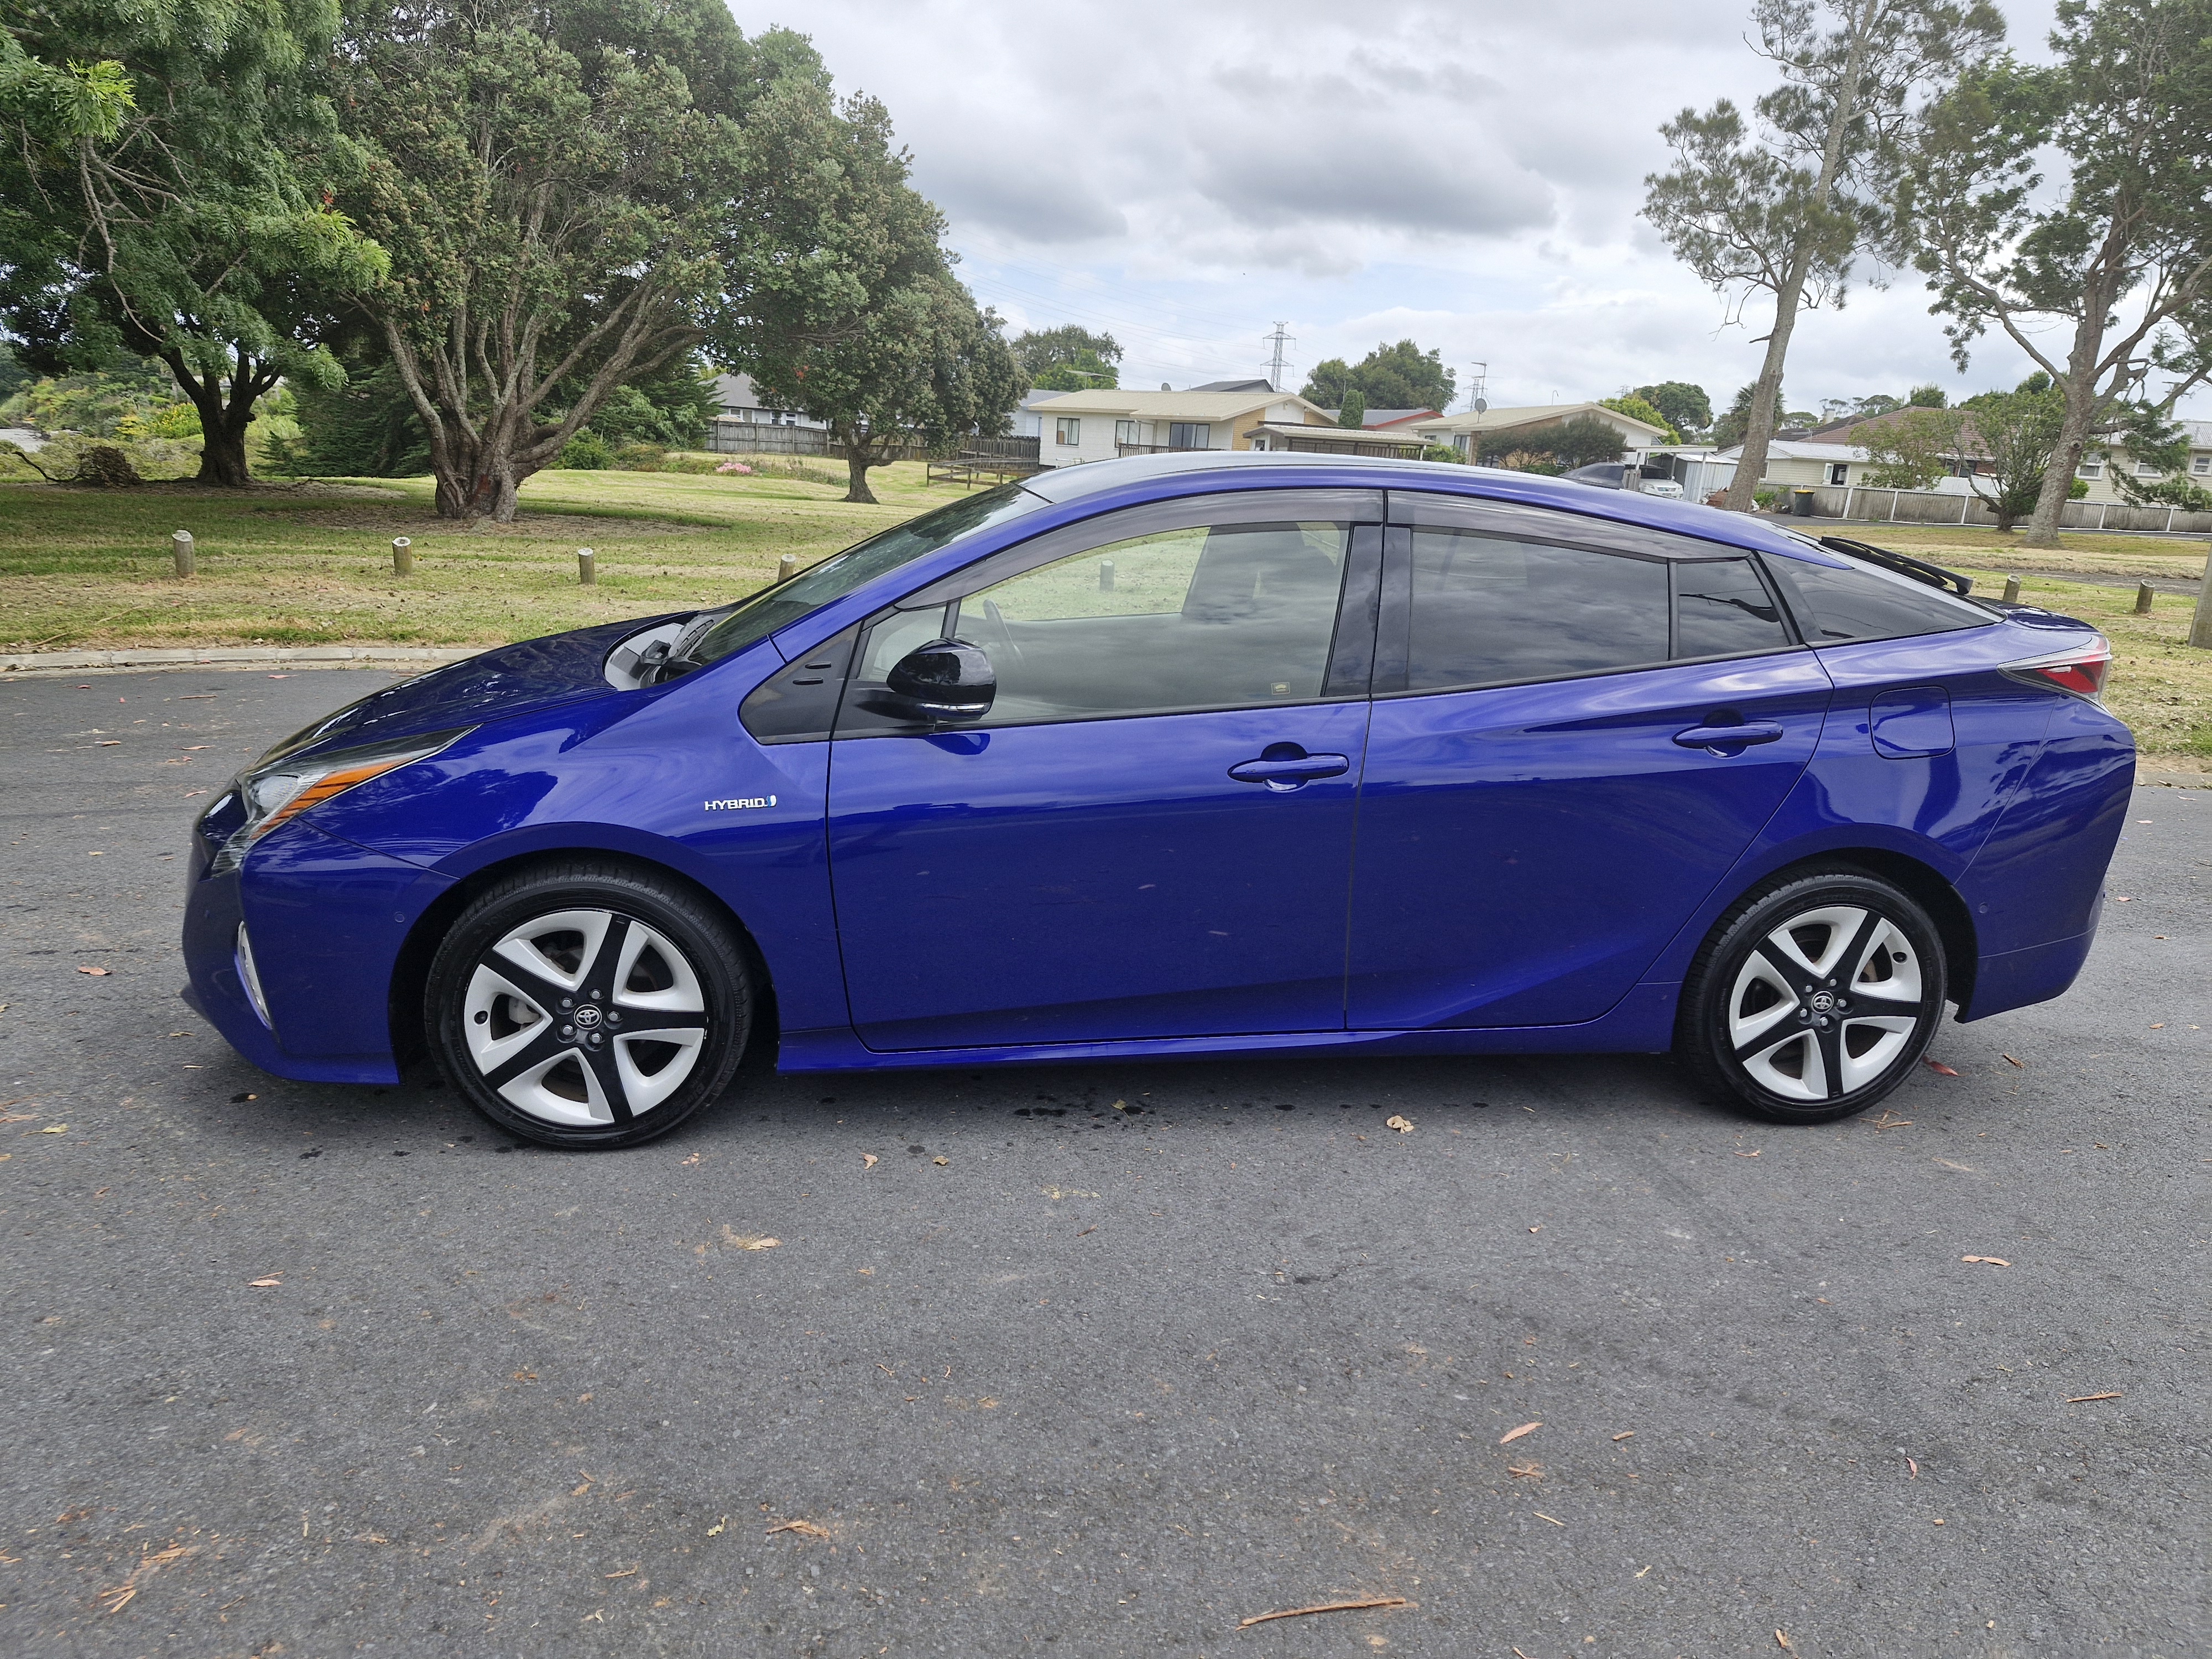 2018 - Toyota Prius. 55K. S SafetyPlus Two-Tone. Cruise Control. Rev Camera. Front/Rear Parking Sensor. Available. $20950.